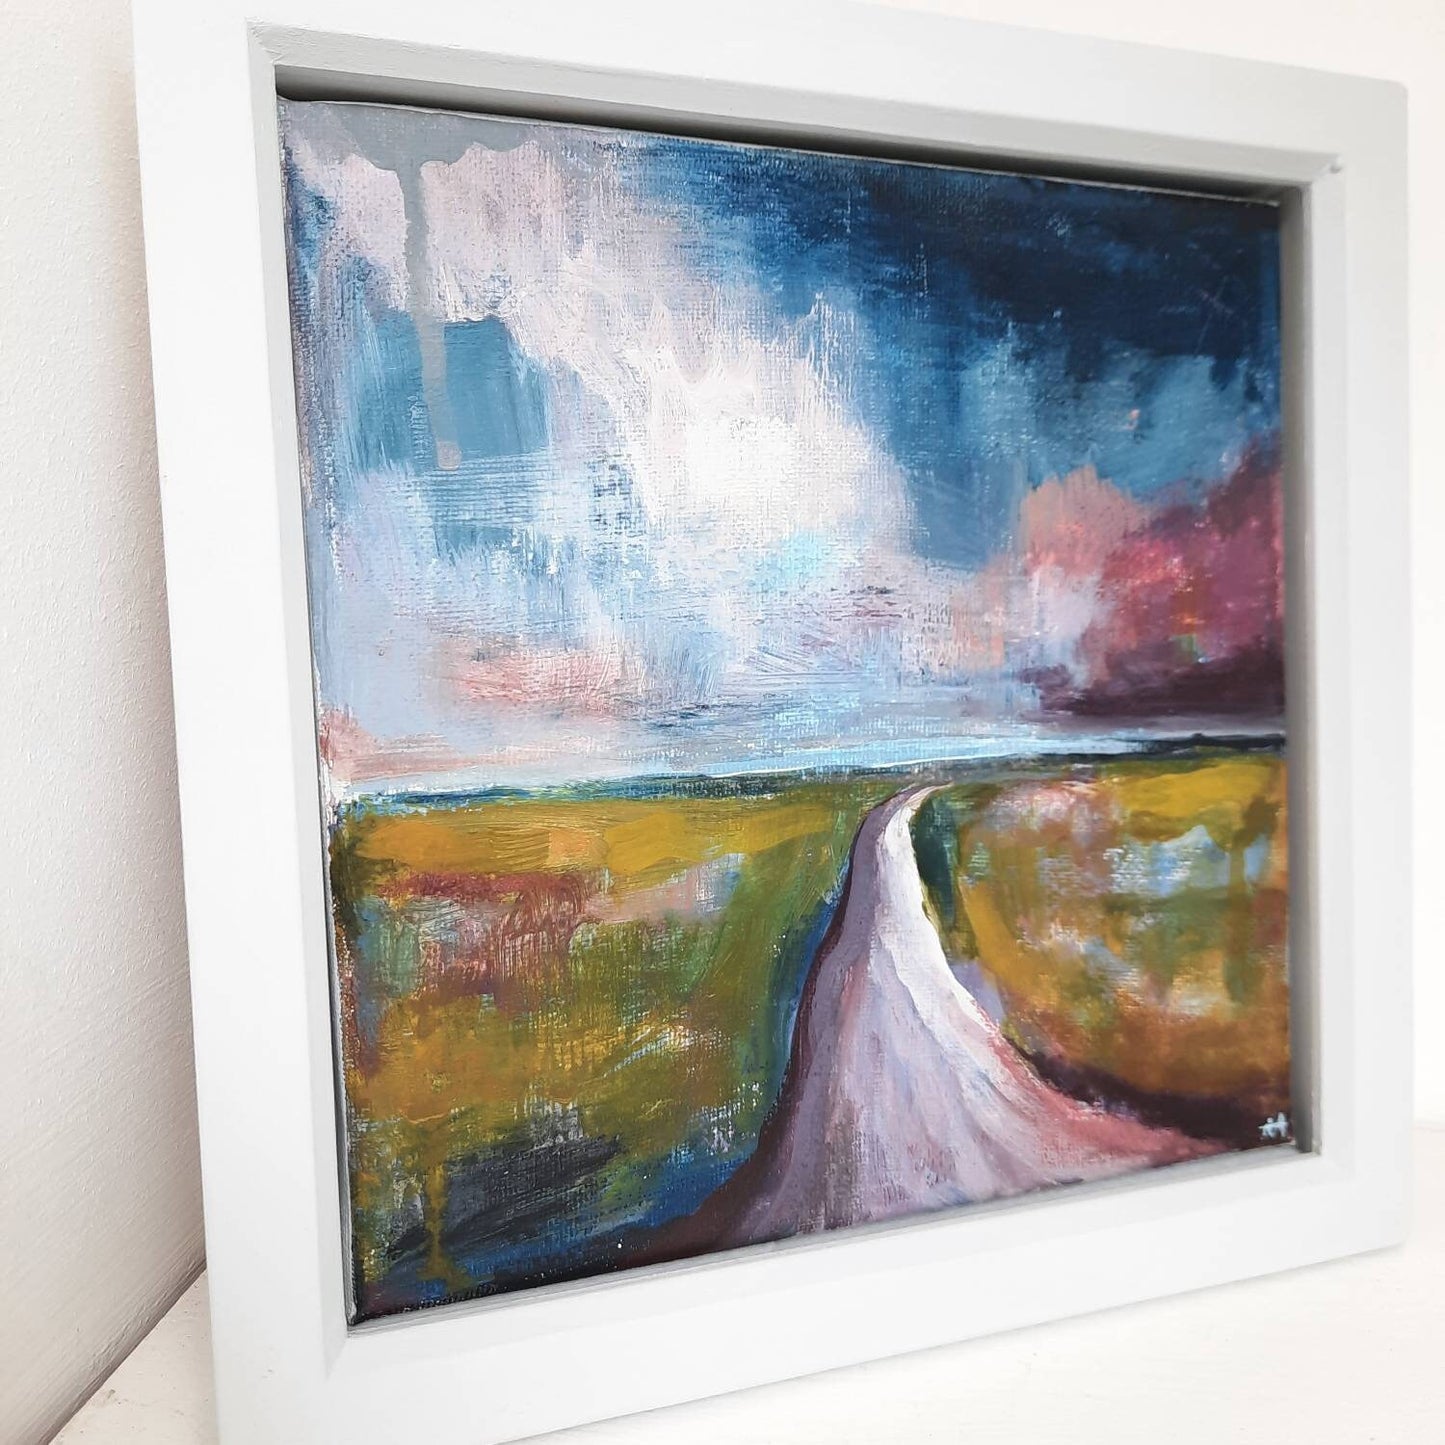 In the Distance - Original Oil on Canvas Landscape Painting | Framed | Abstract Art